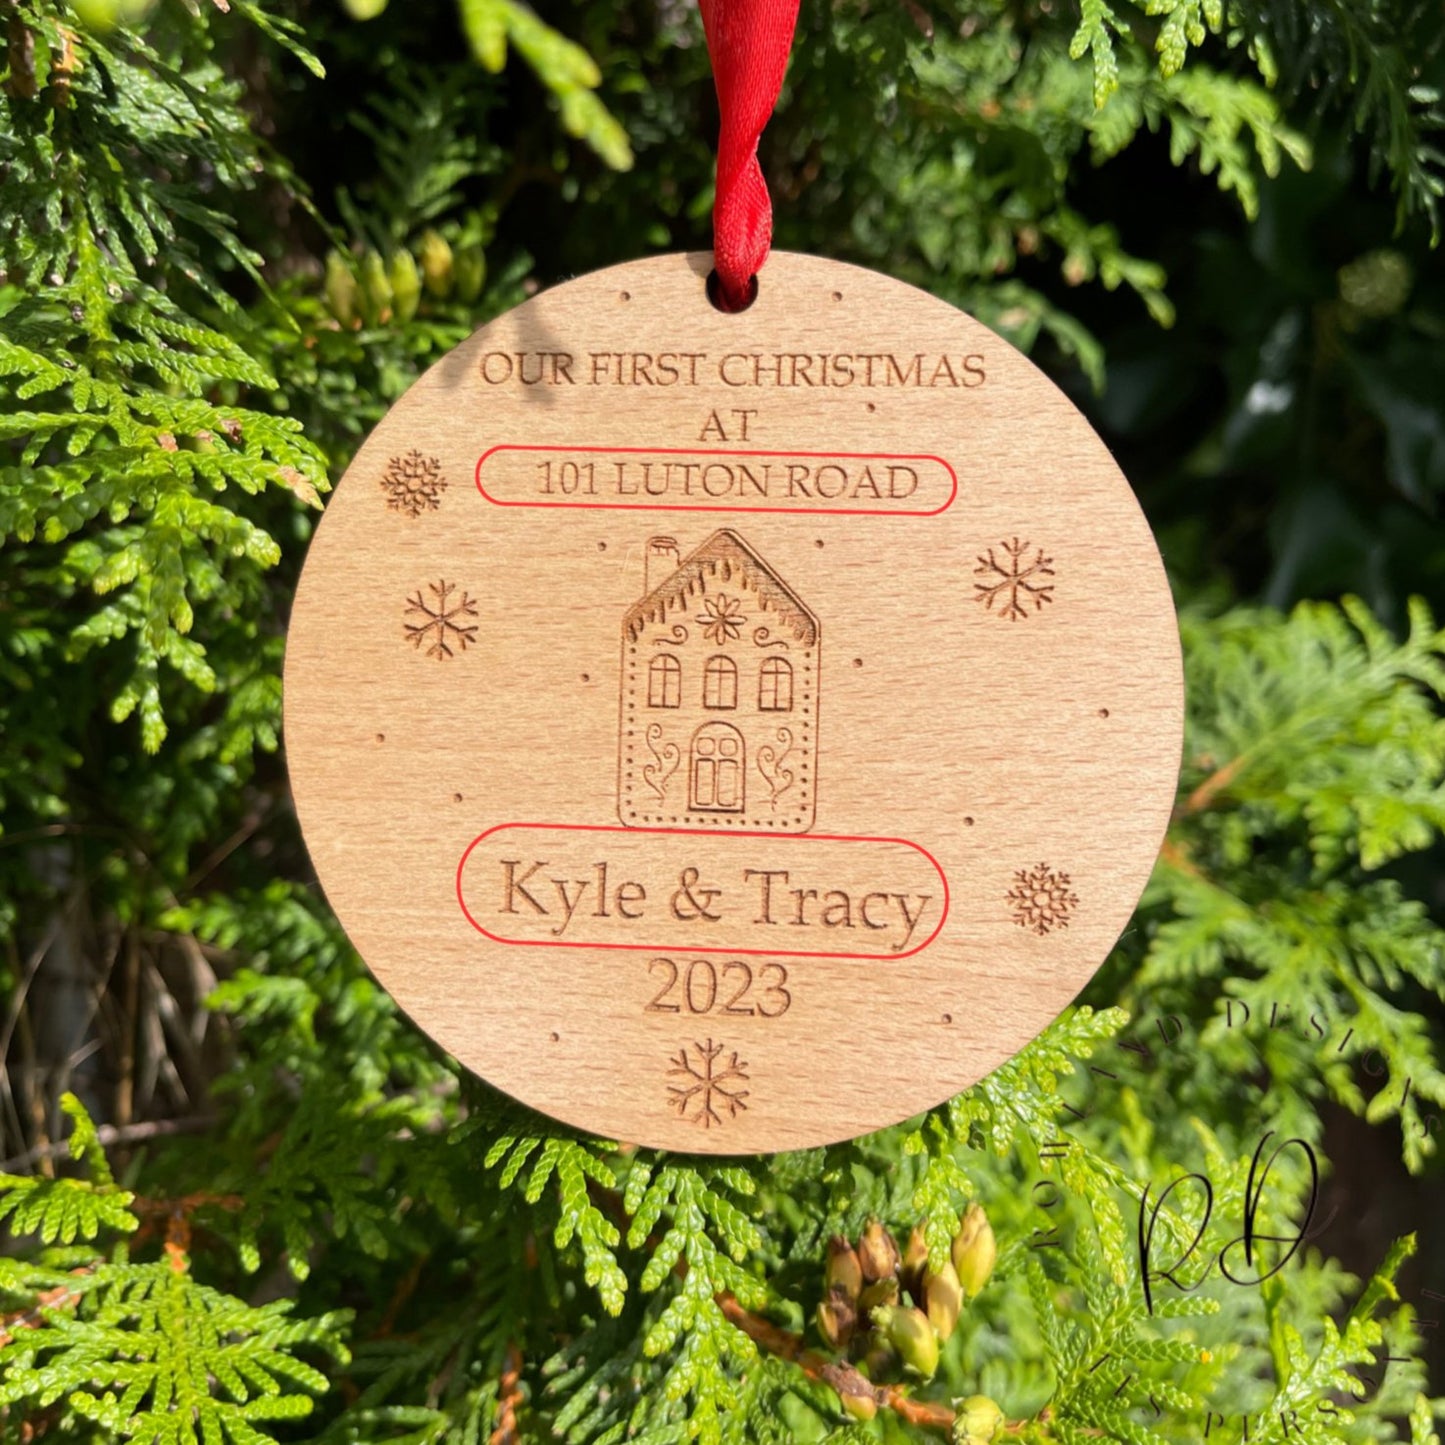 Make your first Christmas in your new home extra special with our Personalized First Home Christmas Ornament. Customize it with your home's name, street, the couple's names, and the year. Crafted from 4mm beech veneer, this 100mm x 100mm ornament adds a touch of elegance to your holiday decor and comes with a vibrant red ribbon. The perfect keepsake for the holiday season.